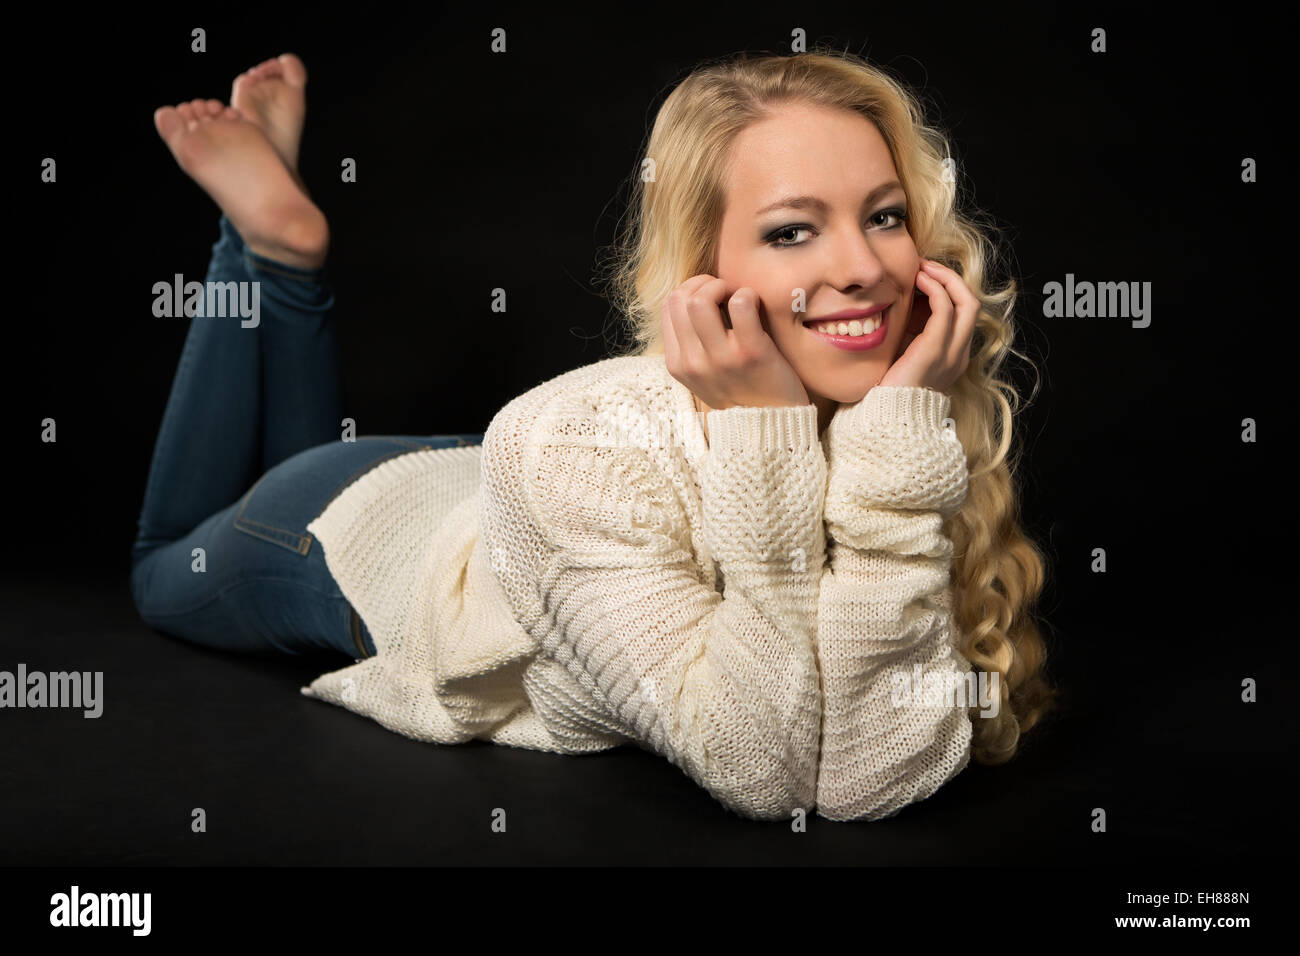 Smiling young woman lying on her stomach, head resting in her hands Stock Photo